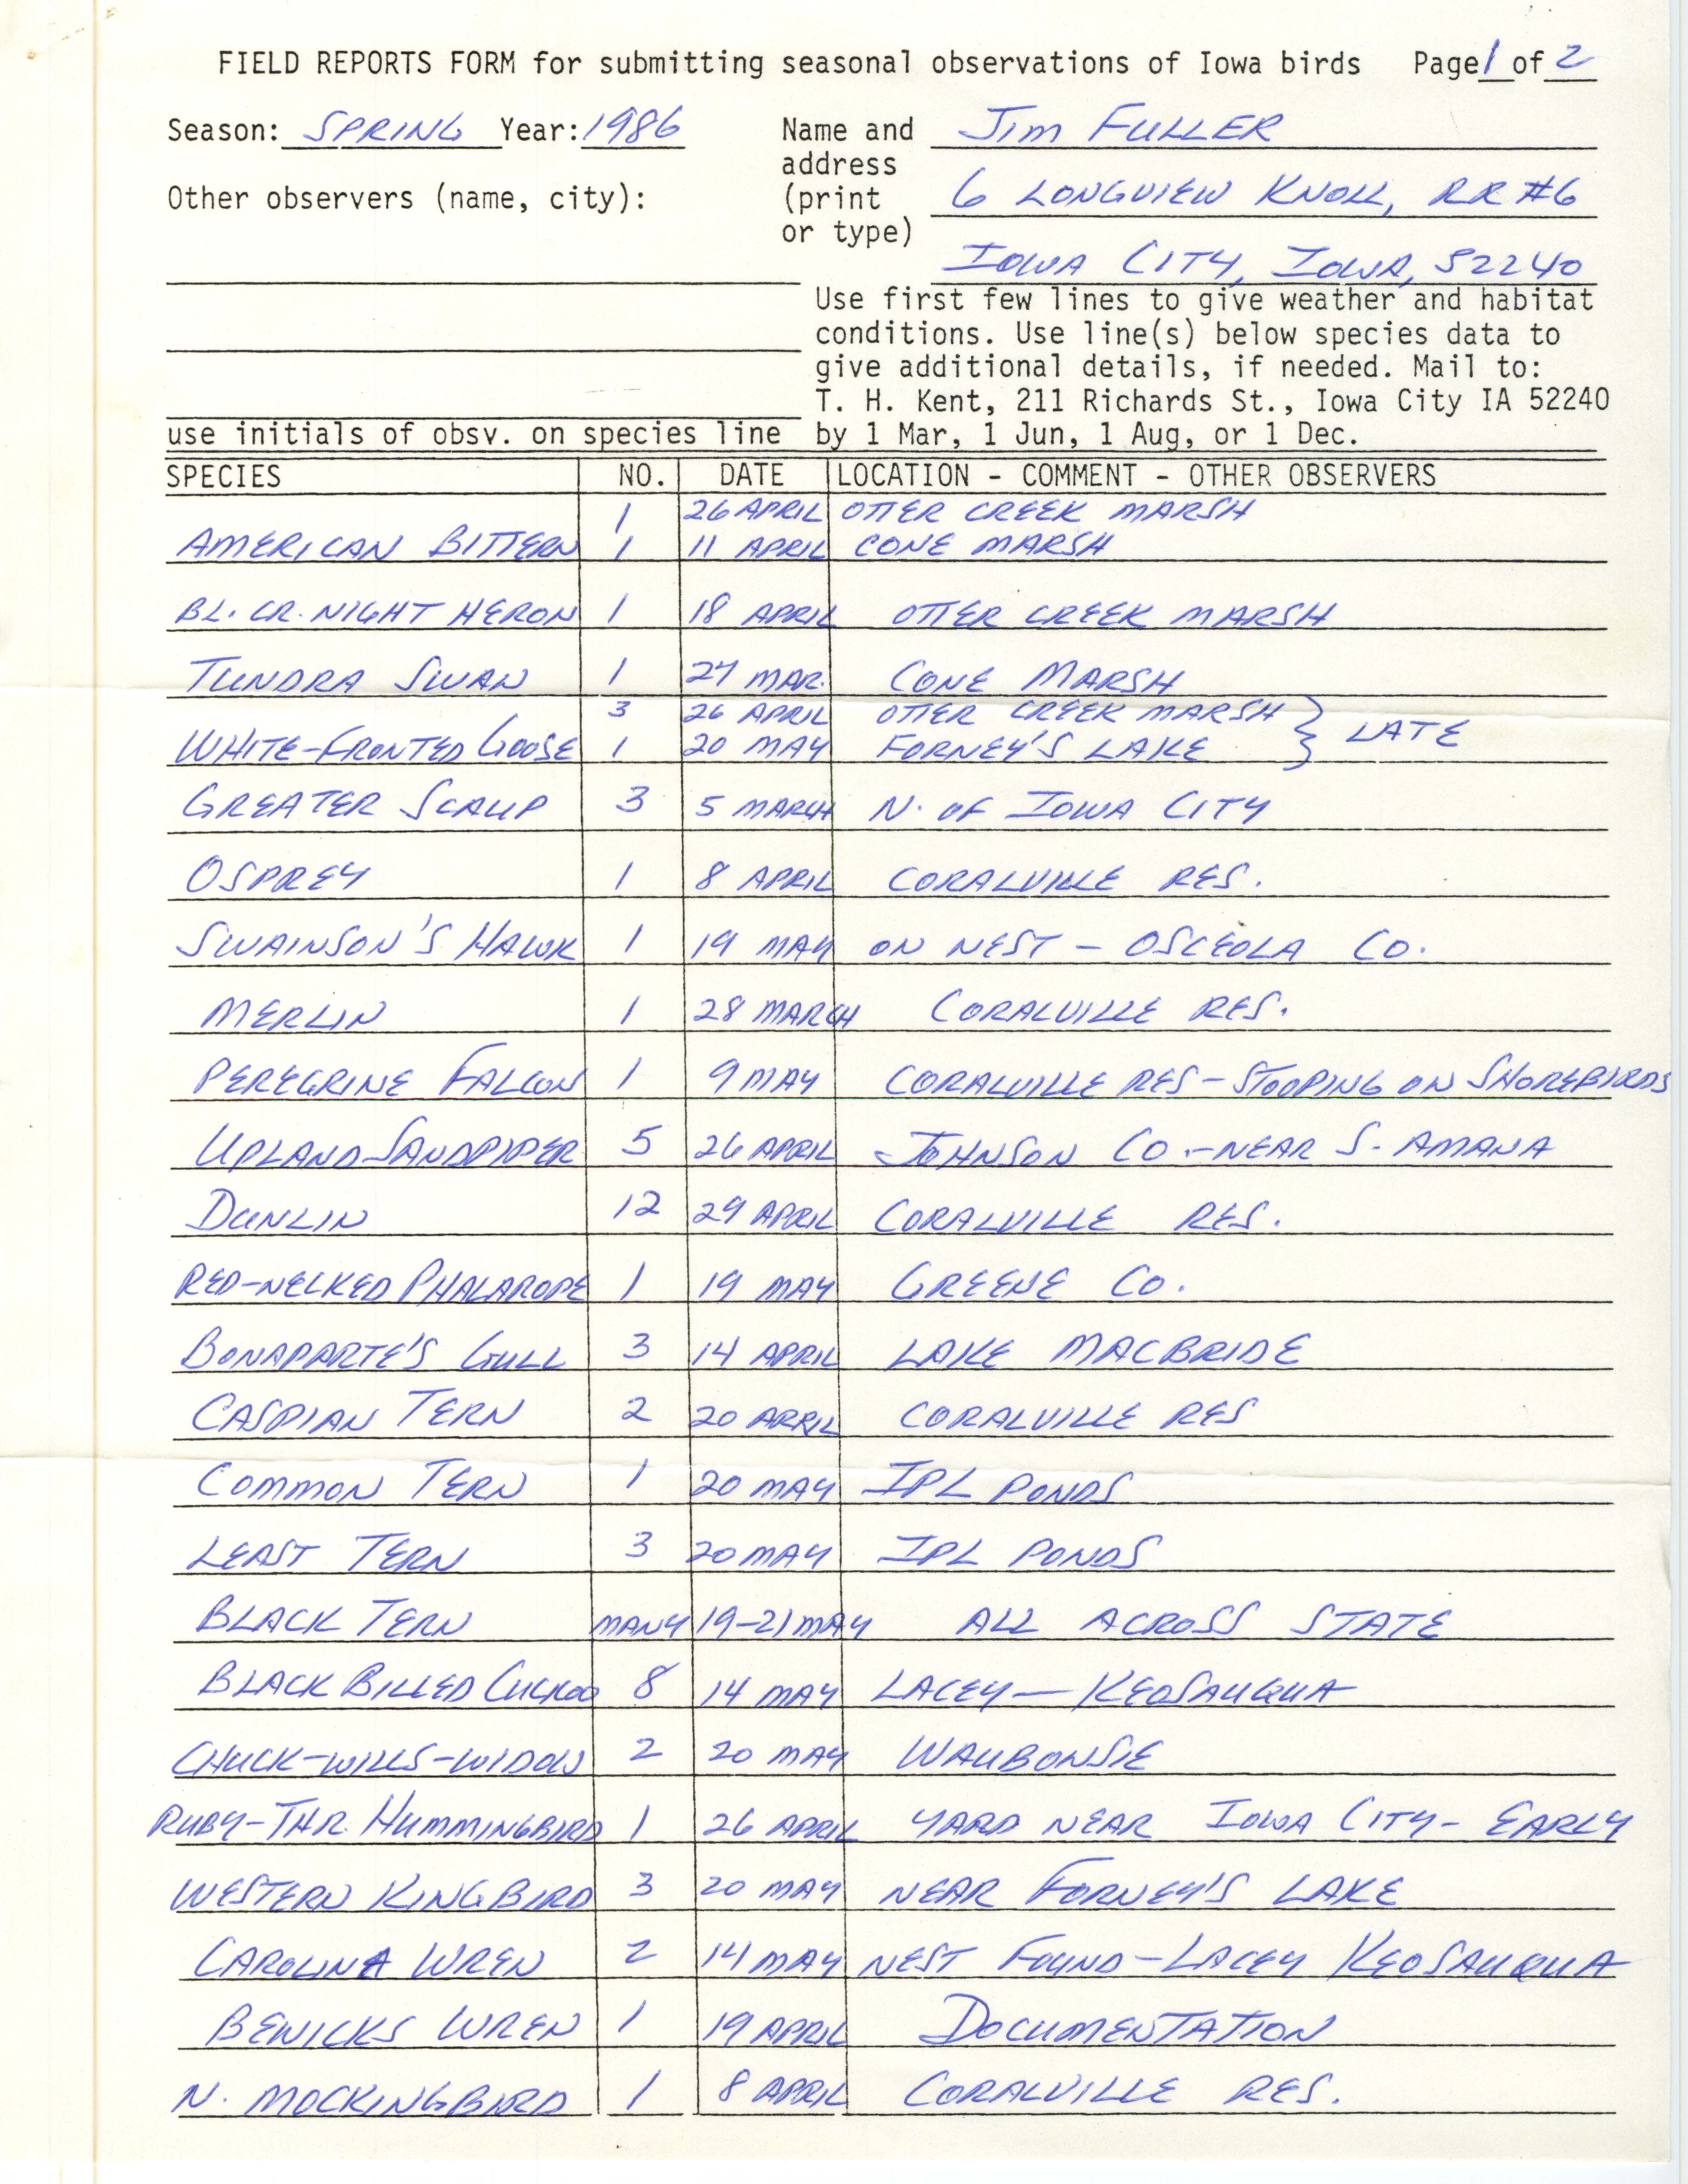 Field reports form for submitting seasonal observations of Iowa birds, Jim Fuller, Spring 1986